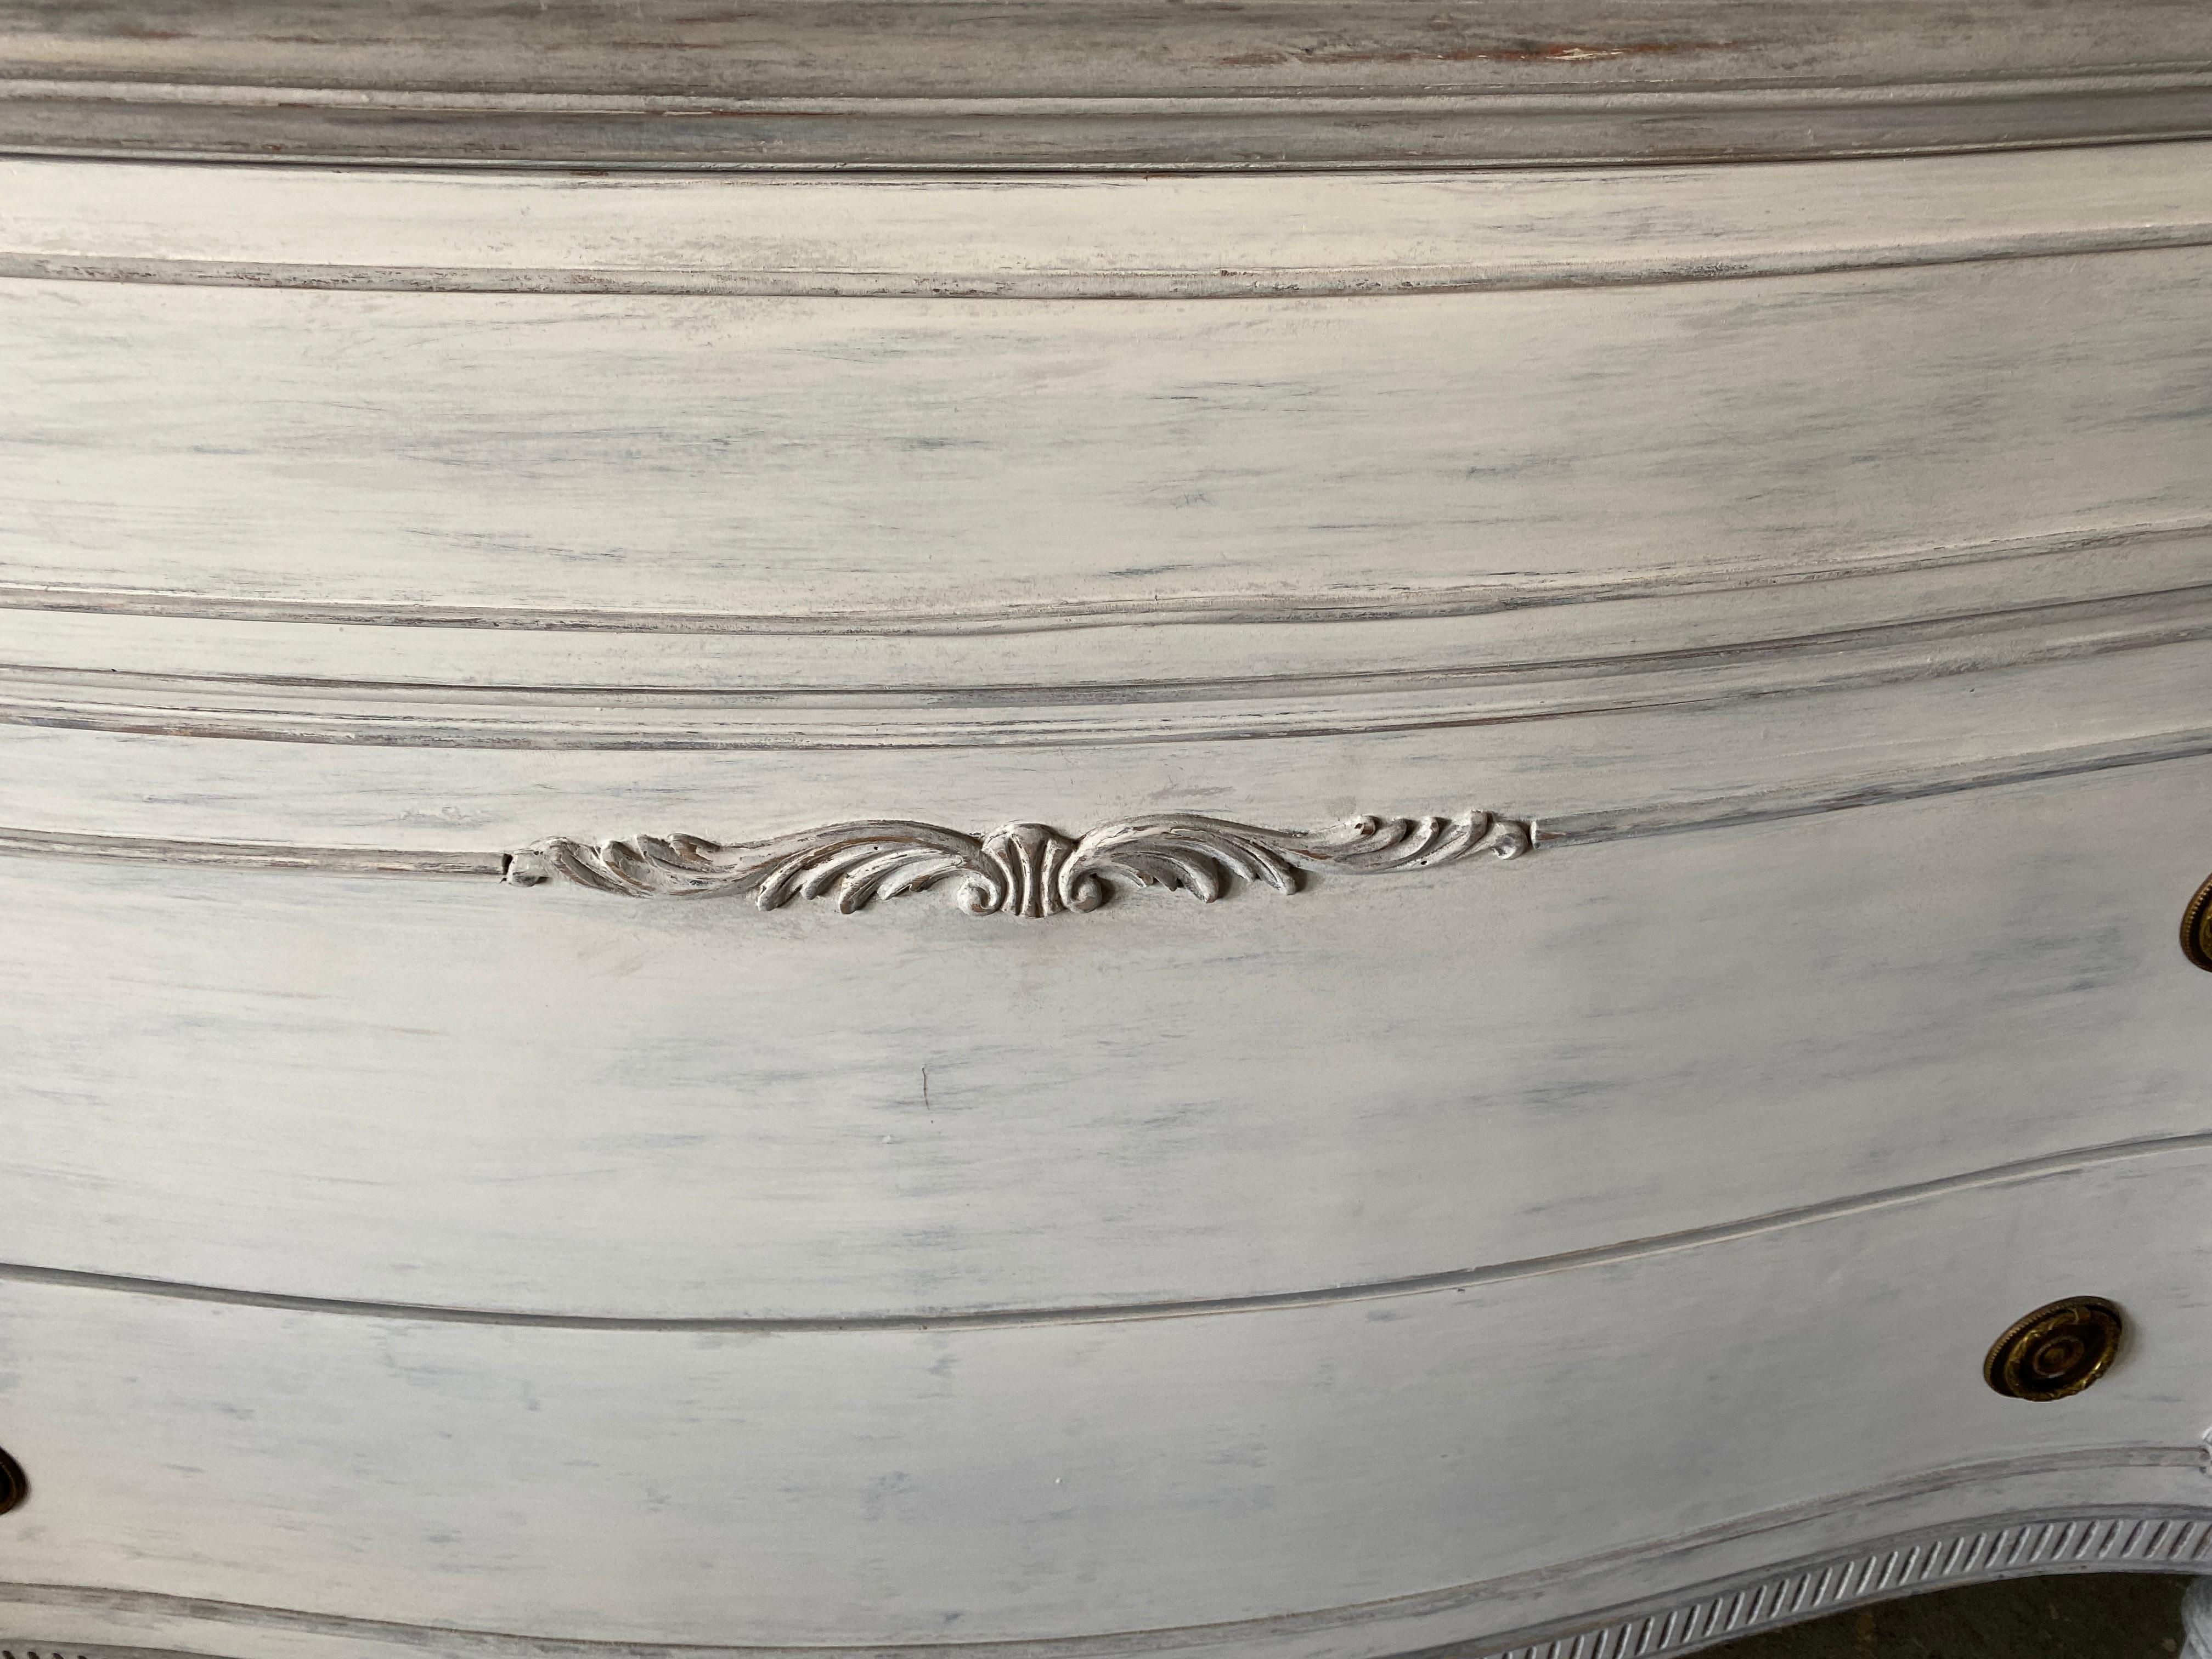 Vintage French Louis XVI Style painted dresser with 3 large drawers for storage.  Paint has a slight blue grey tint with light grey edge detail.
The style is suitable for various decor, including Swedish Gustavian, classical, neoclassical, French